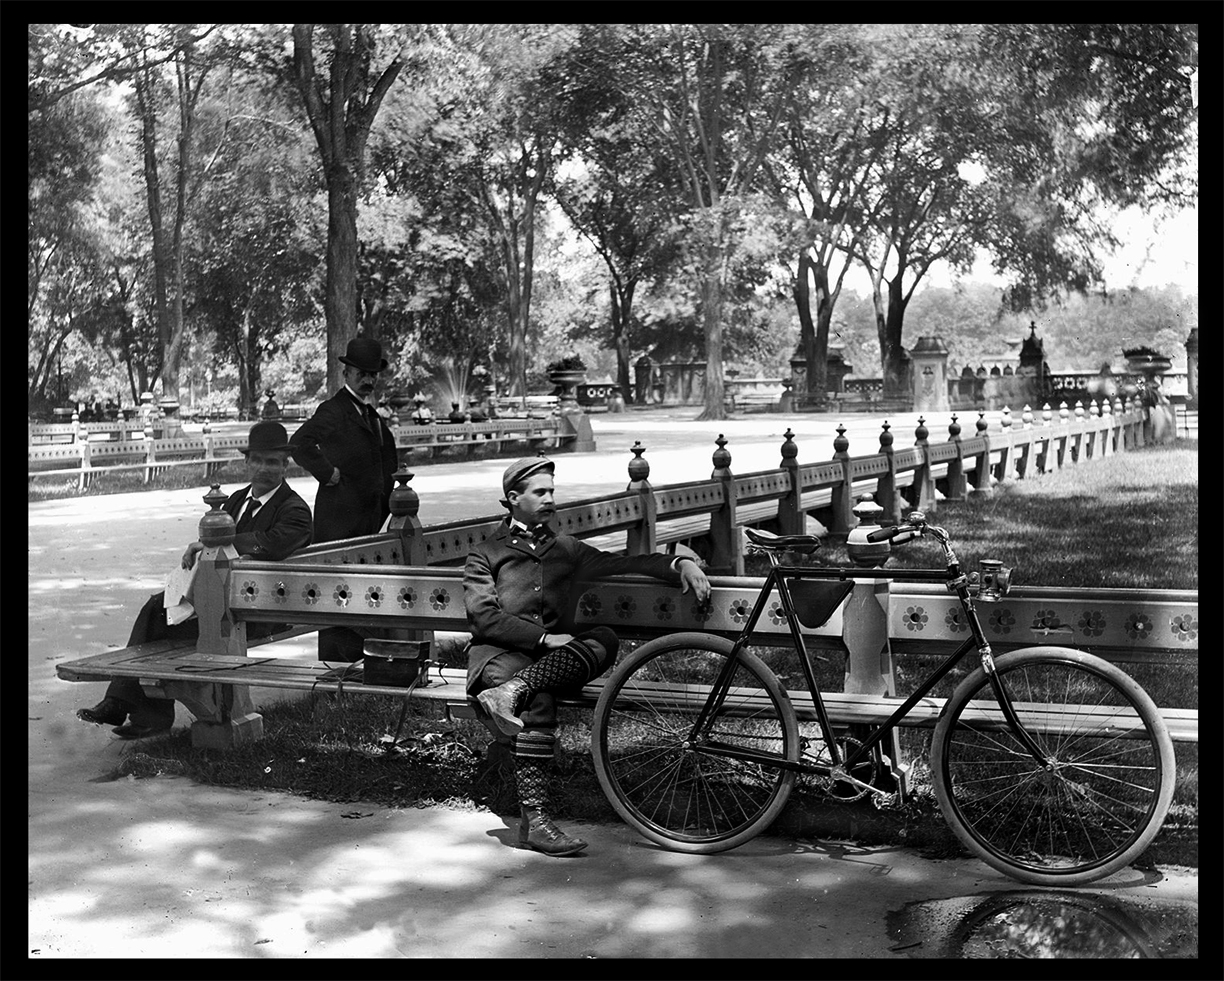 Bike in Central Parkc.1900 from original 4x5 glass plate negative